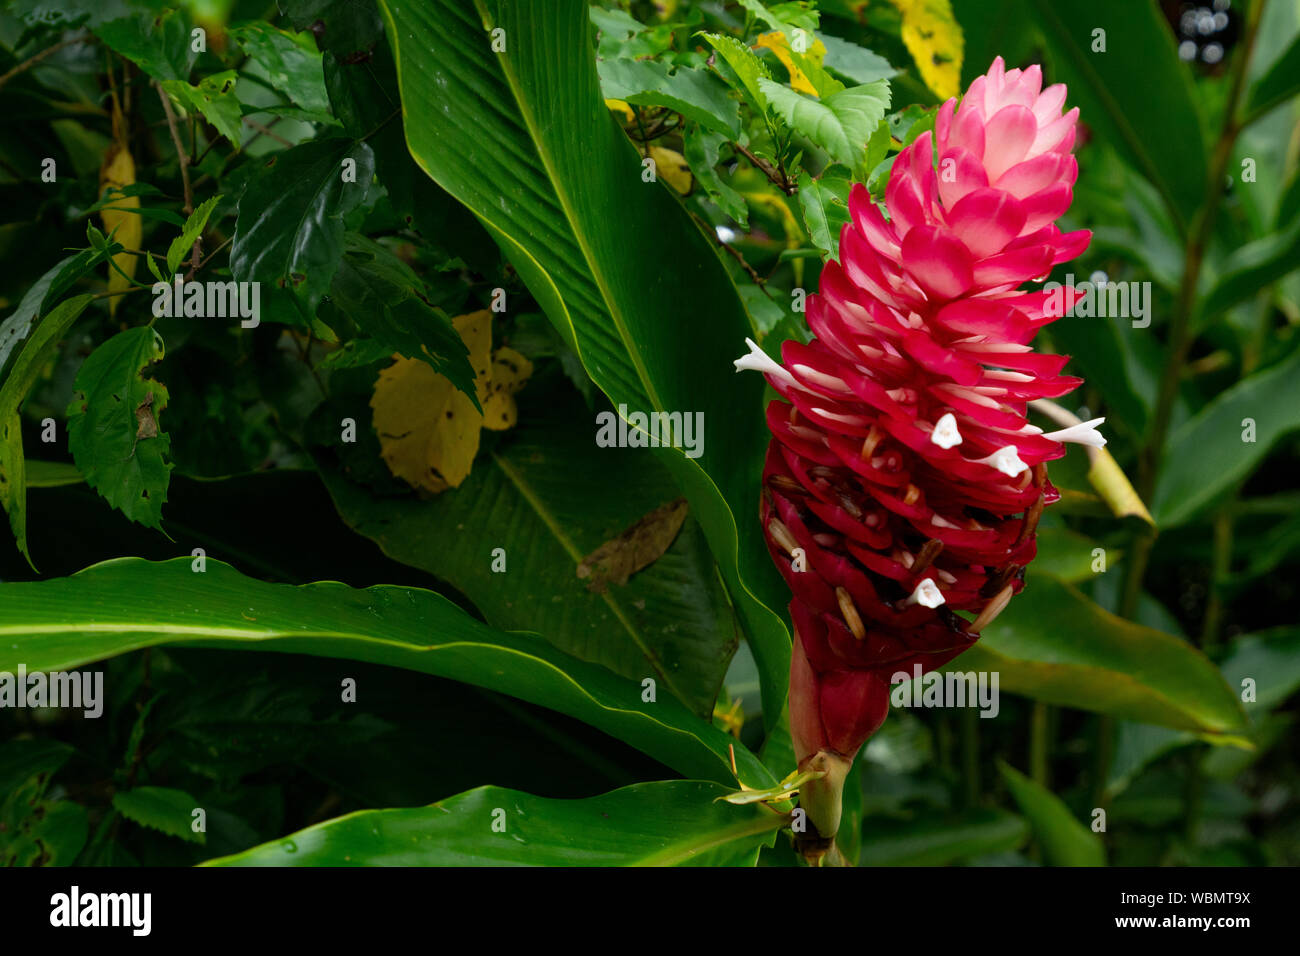 Costa Rica, Central America. Vermillion red tropical flower leaf in the rain forest. Stock Photo